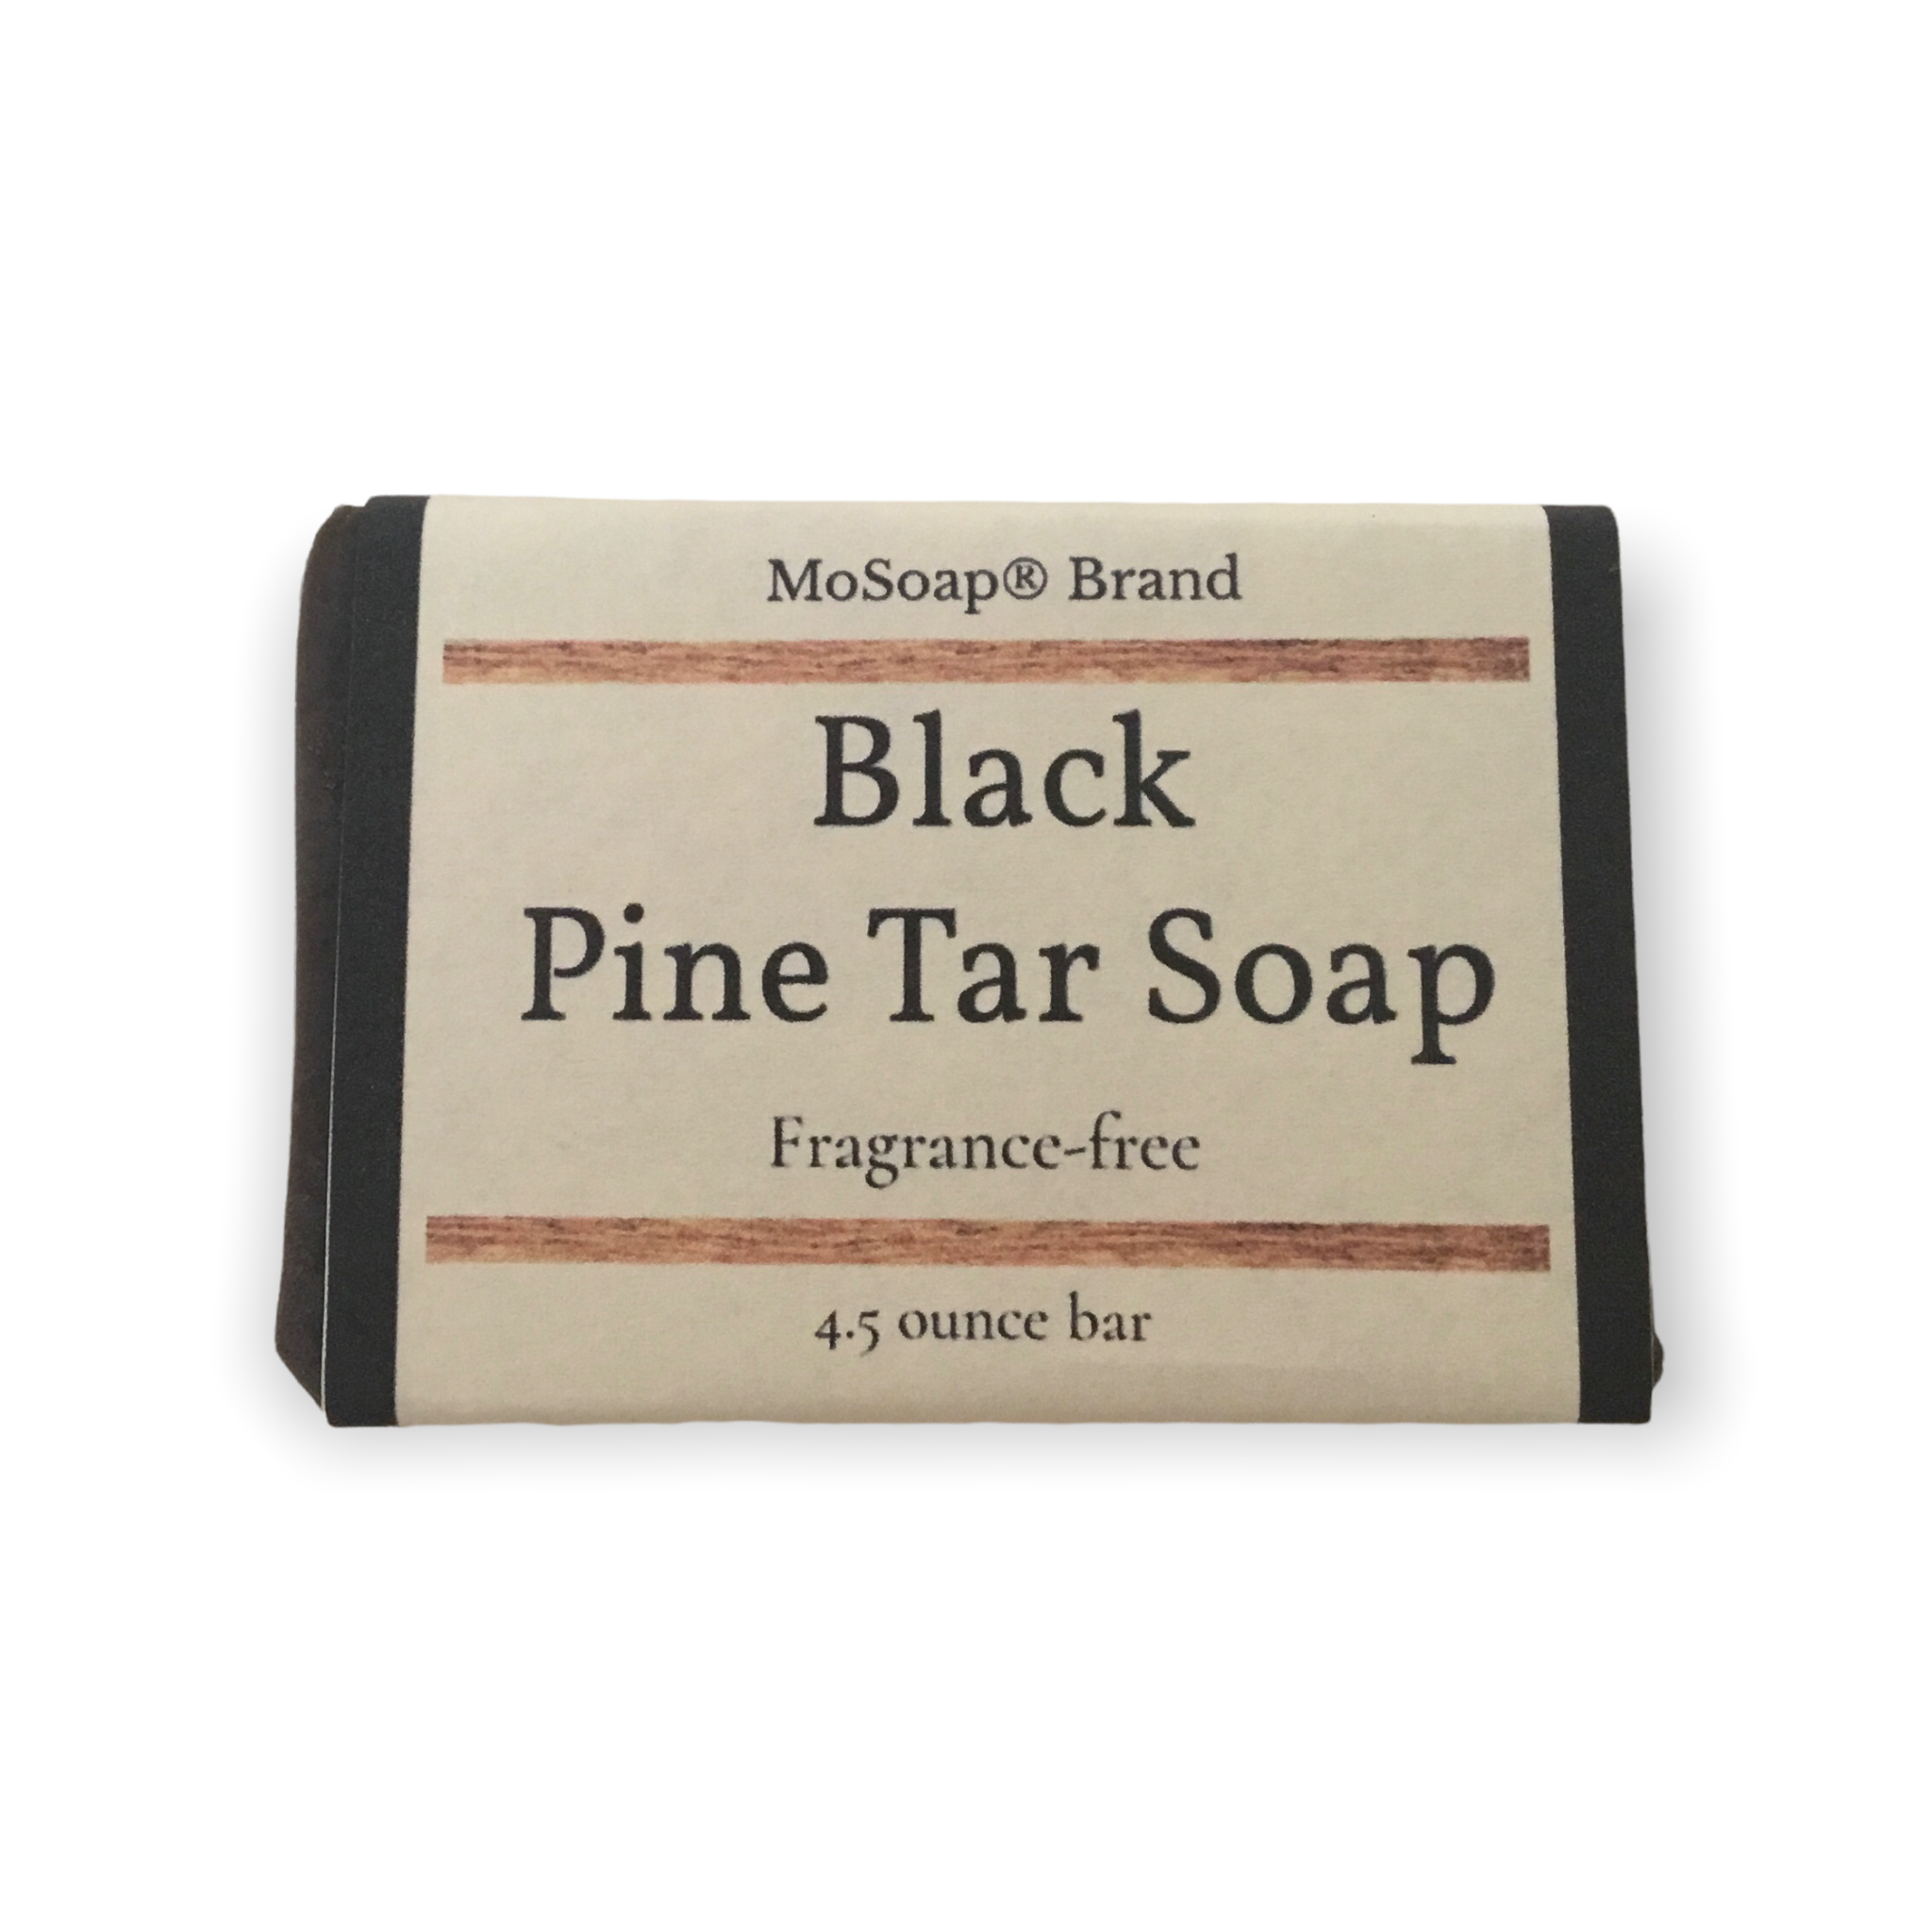 Pine Tar Soap with Goat Milk - Unscented 4.5 oz